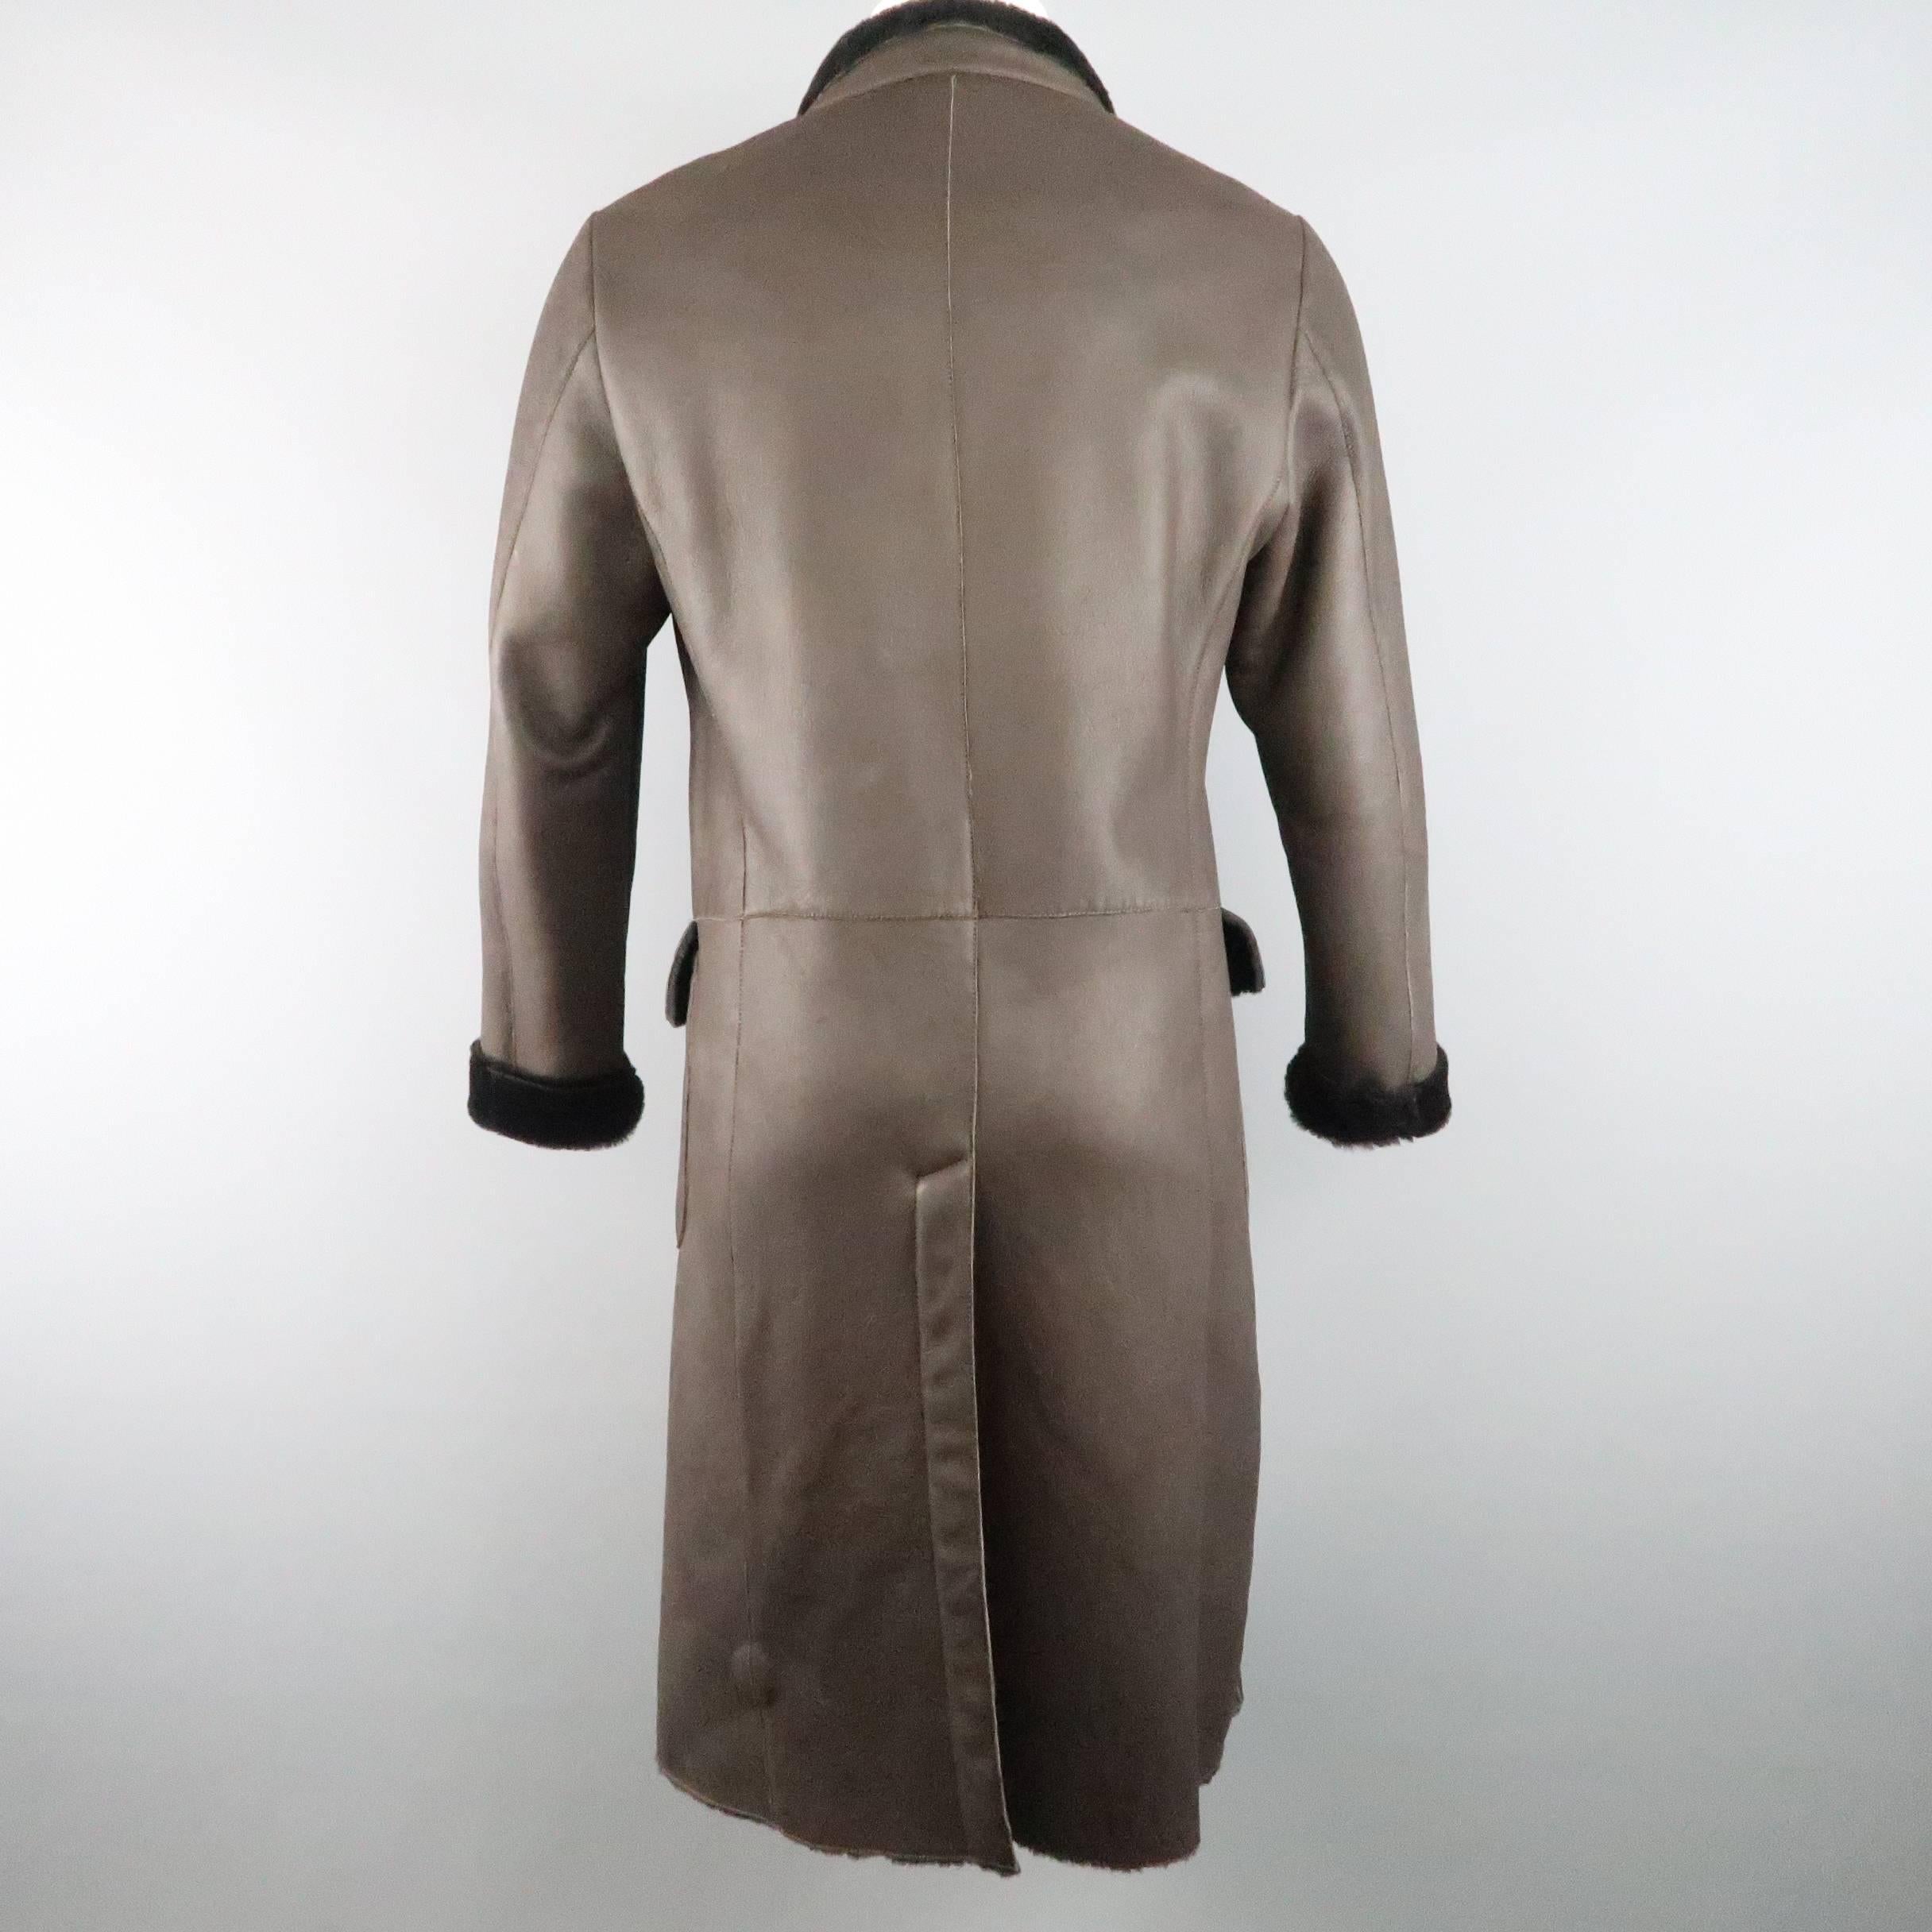 GIORGIO ARMANI 38 Brown Solid Shearling Fur Leather Double Breasted Coat 1